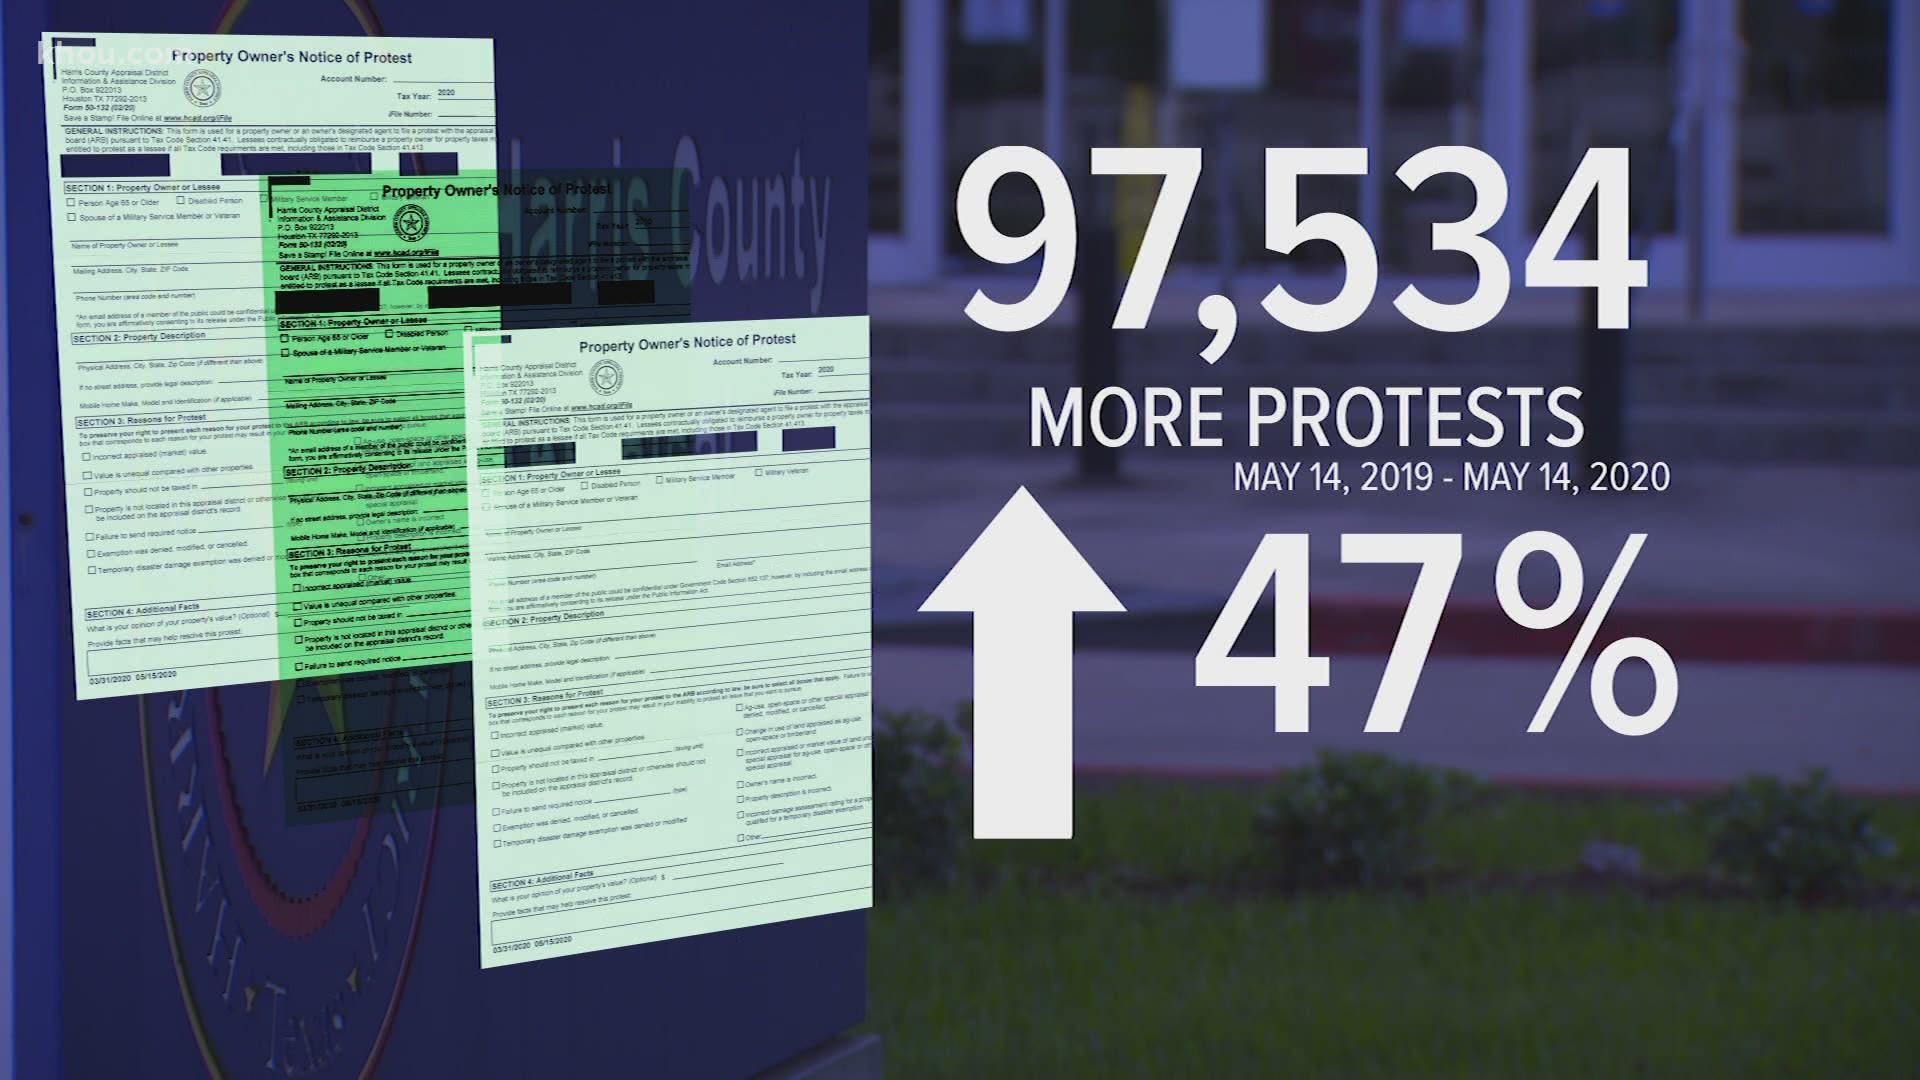 The Harris County Appraisal District said protests are currently up 47% compared to this time last year.